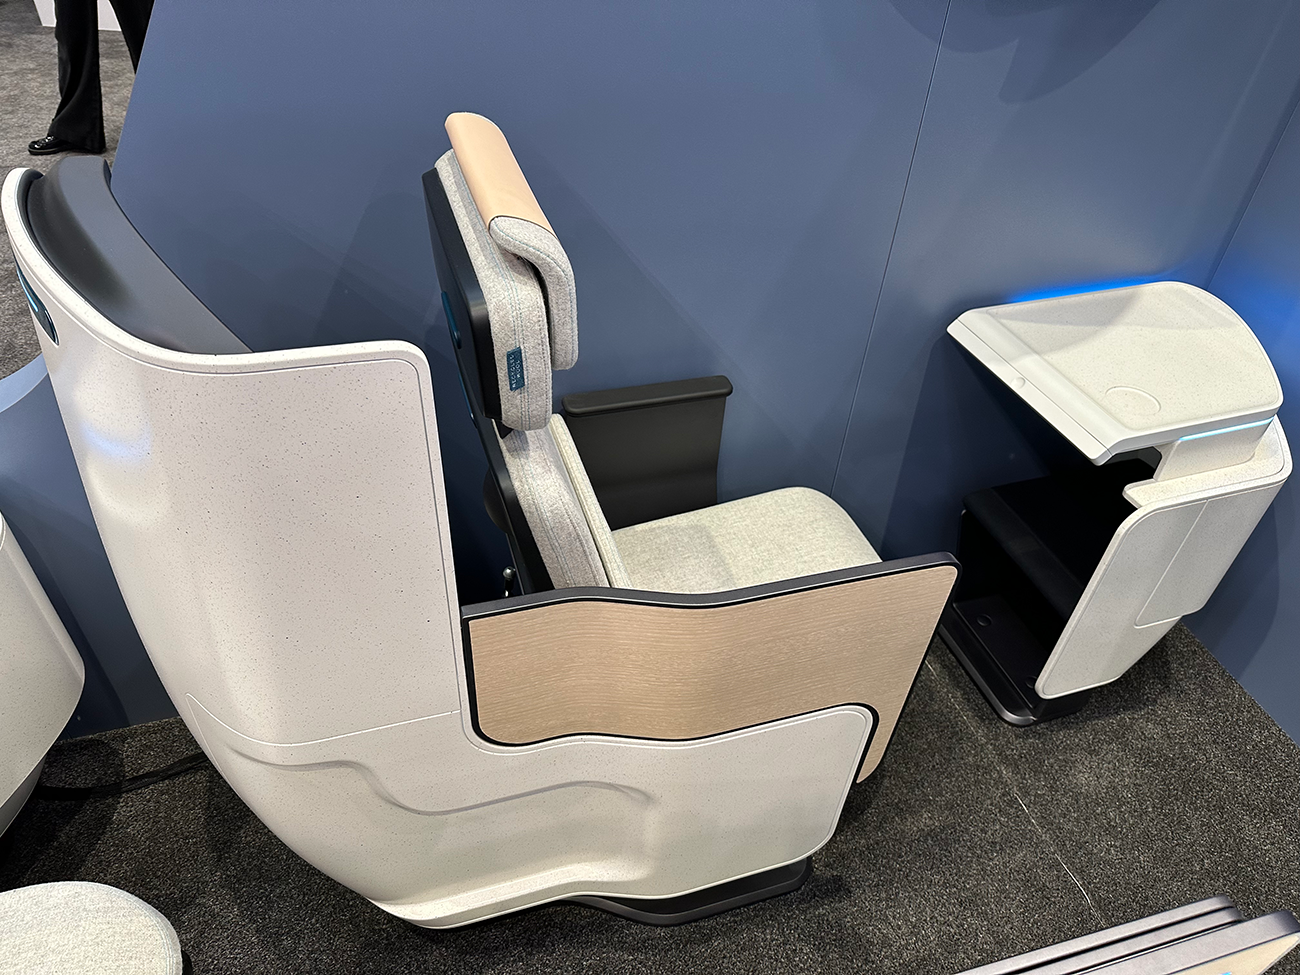 Airplane seat module made out of green recyclable material